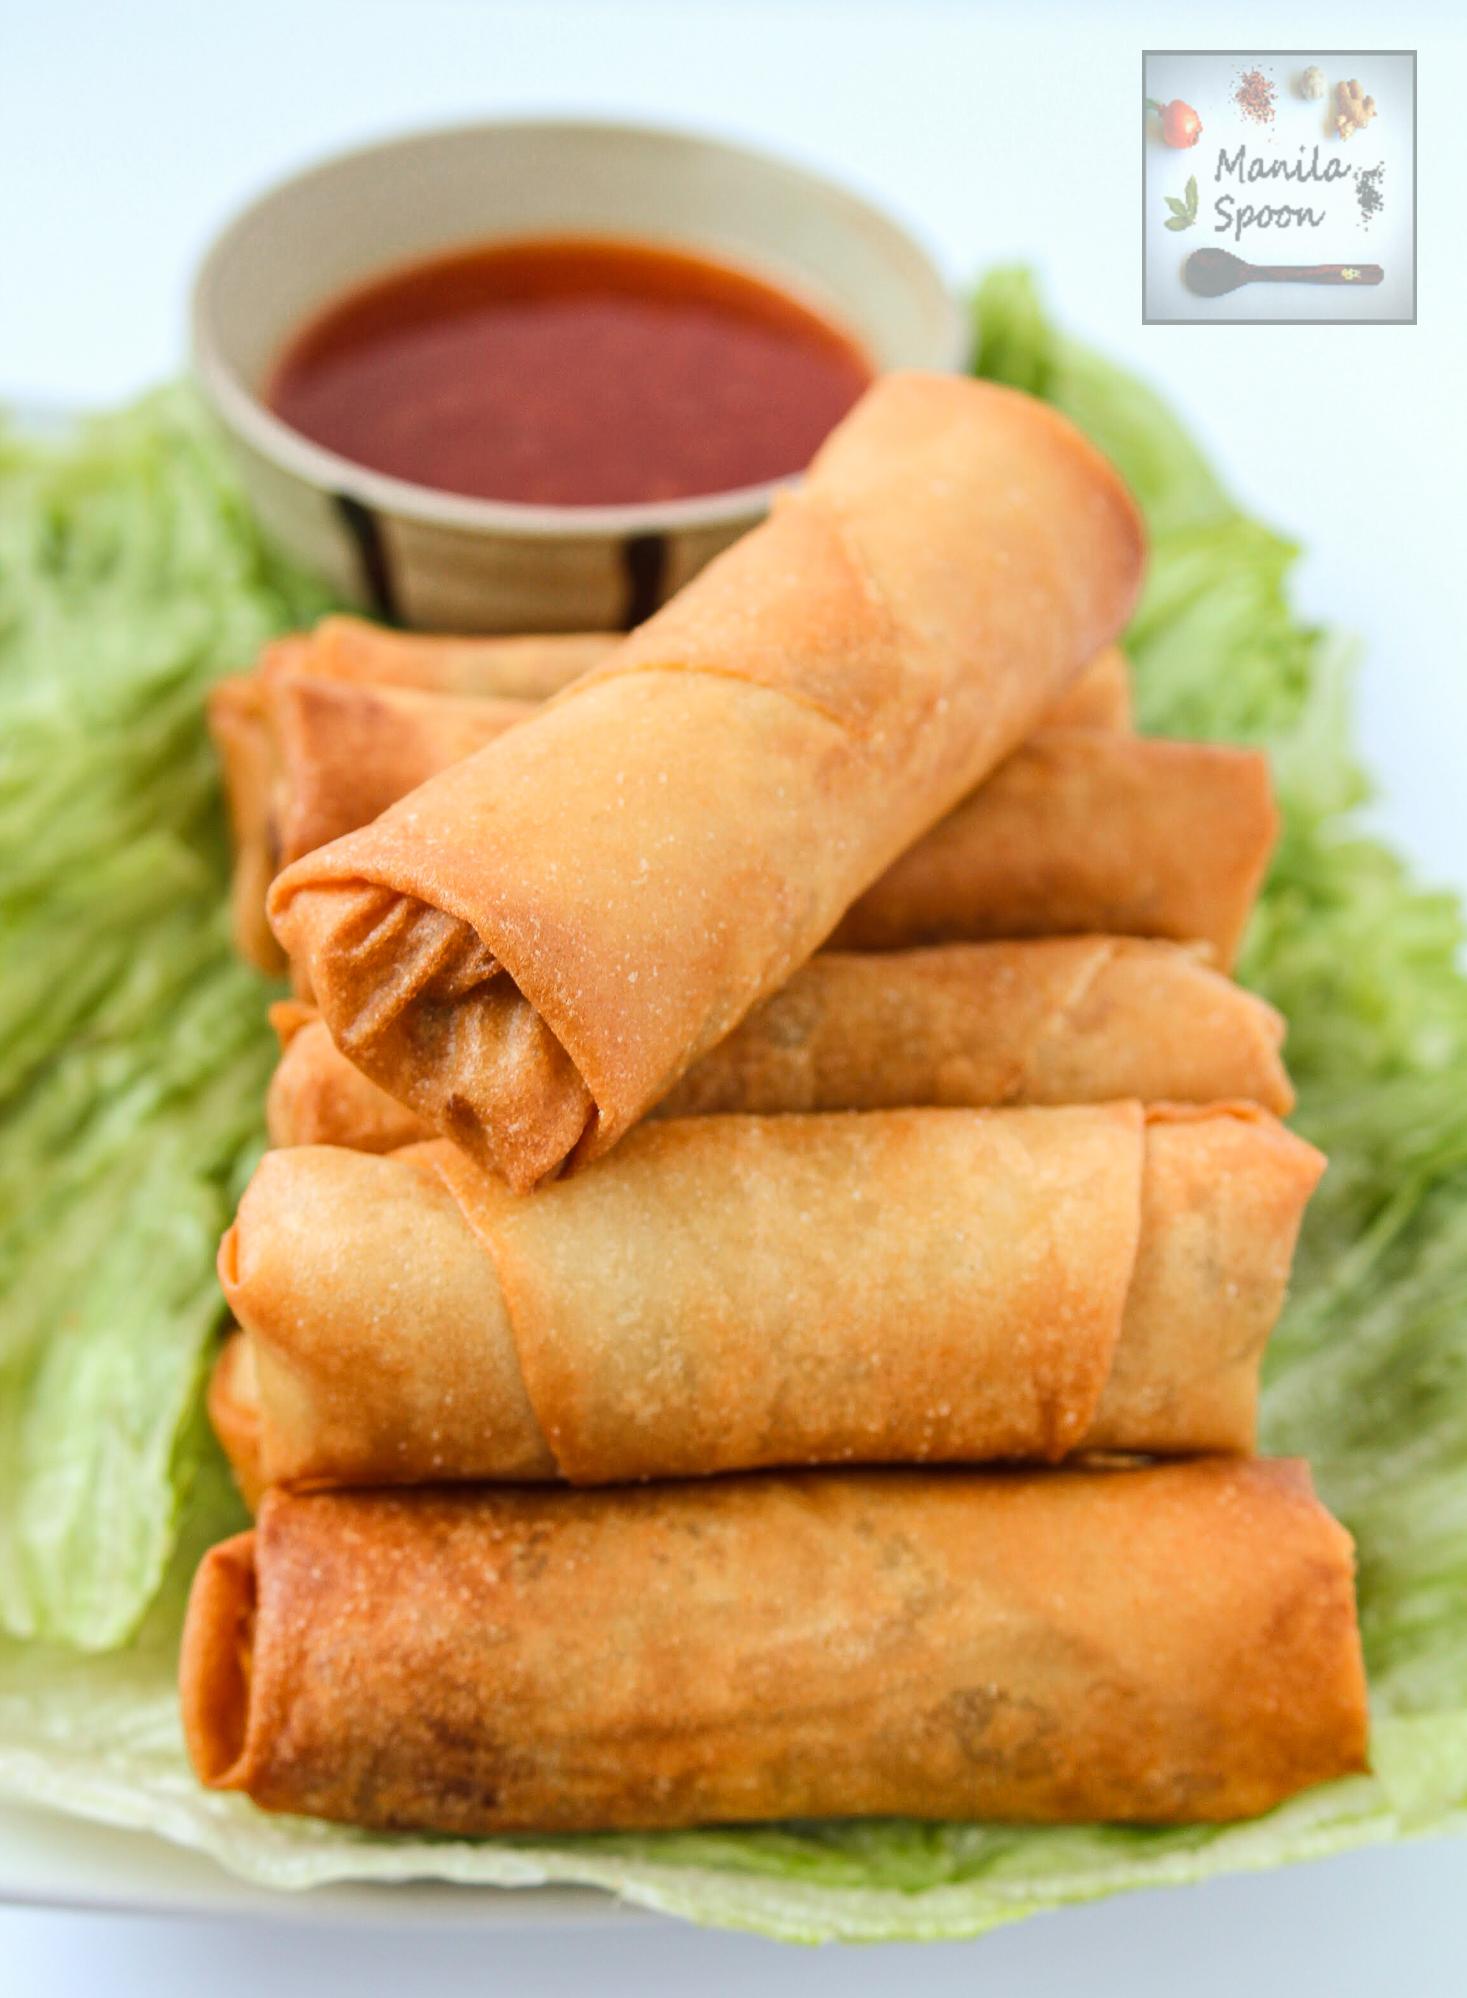  Don't let the rolling scare you - these lumpia are easier than they look!